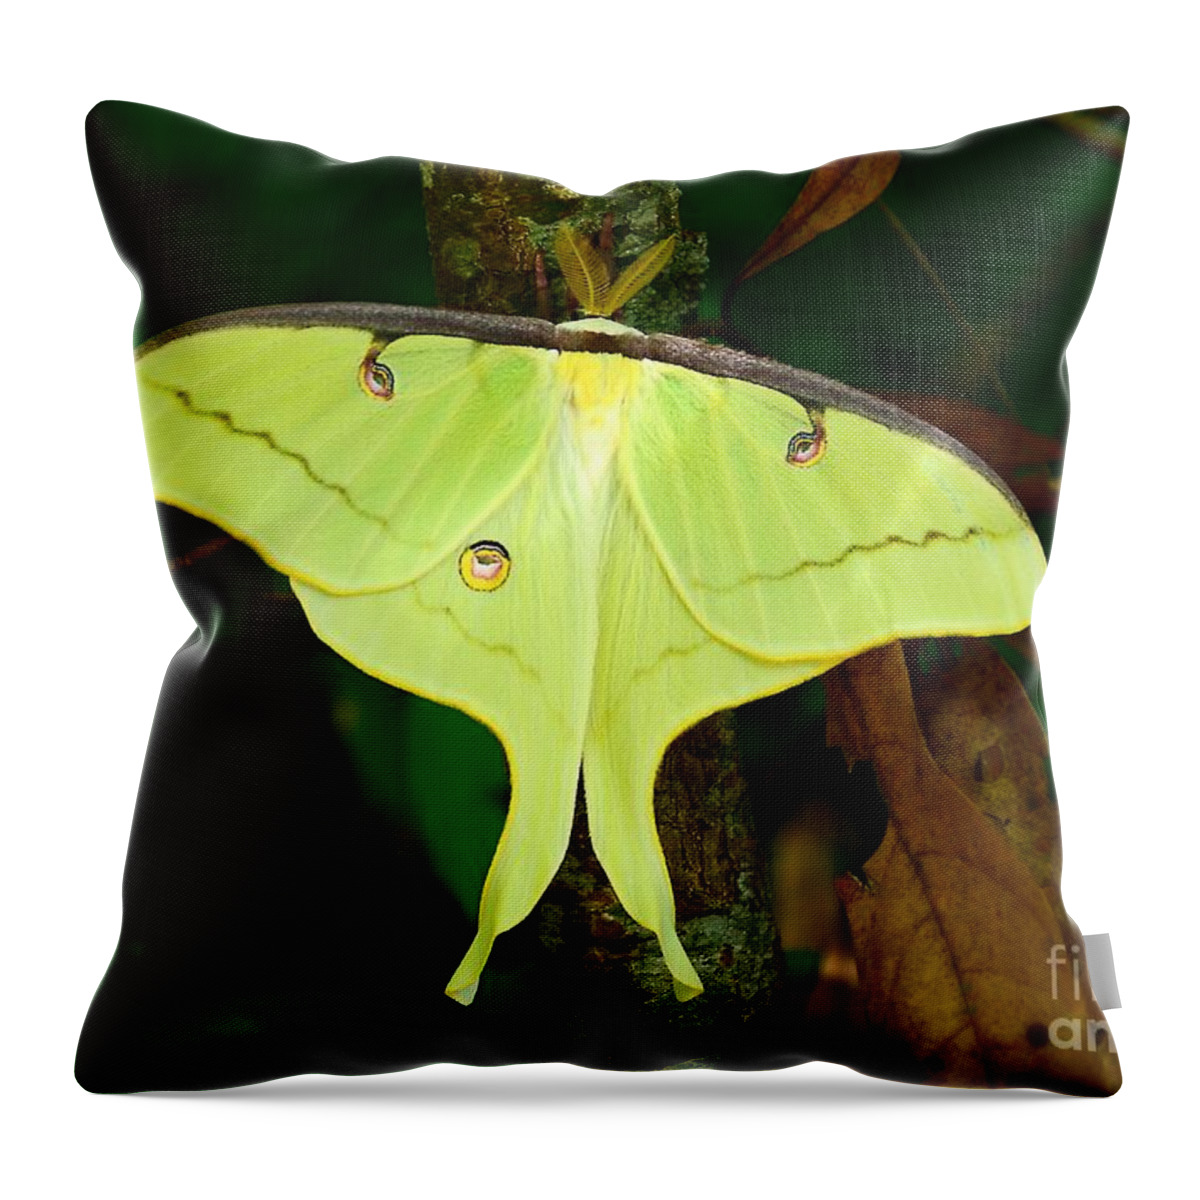 Luna Moth Throw Pillow featuring the photograph Luna Moth by Kathy Baccari